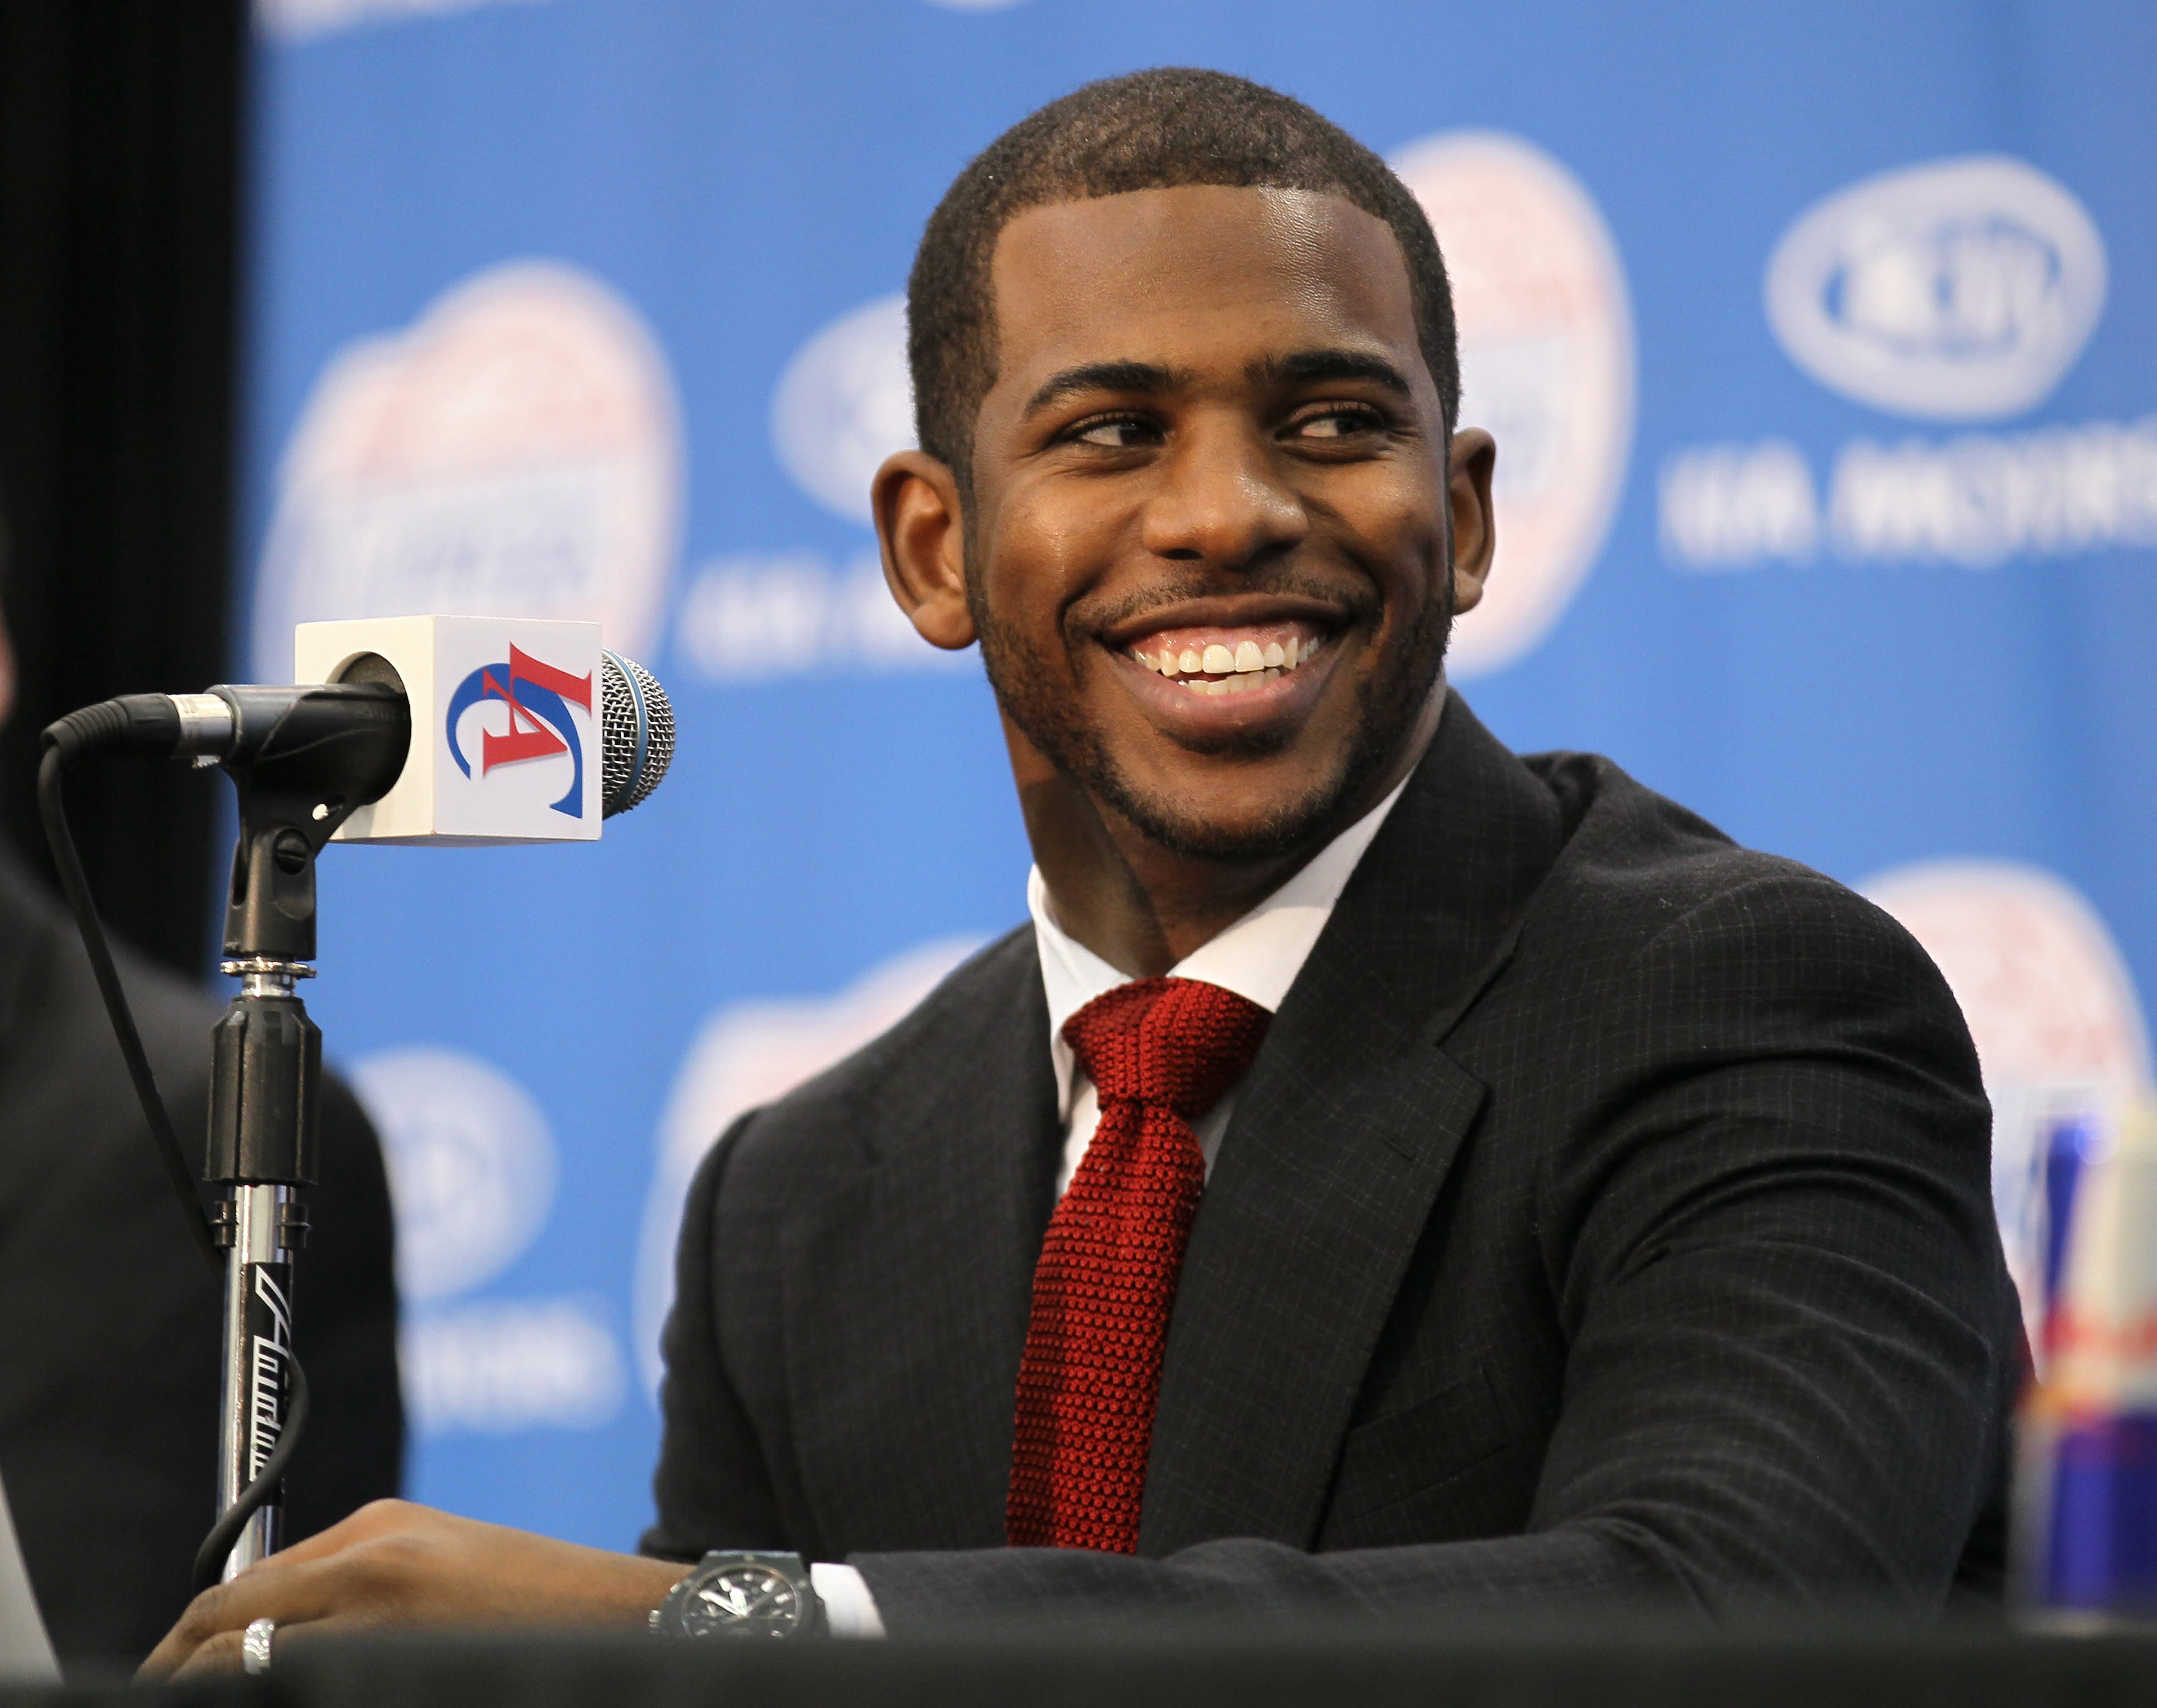 Chris Paul joins the Clippers